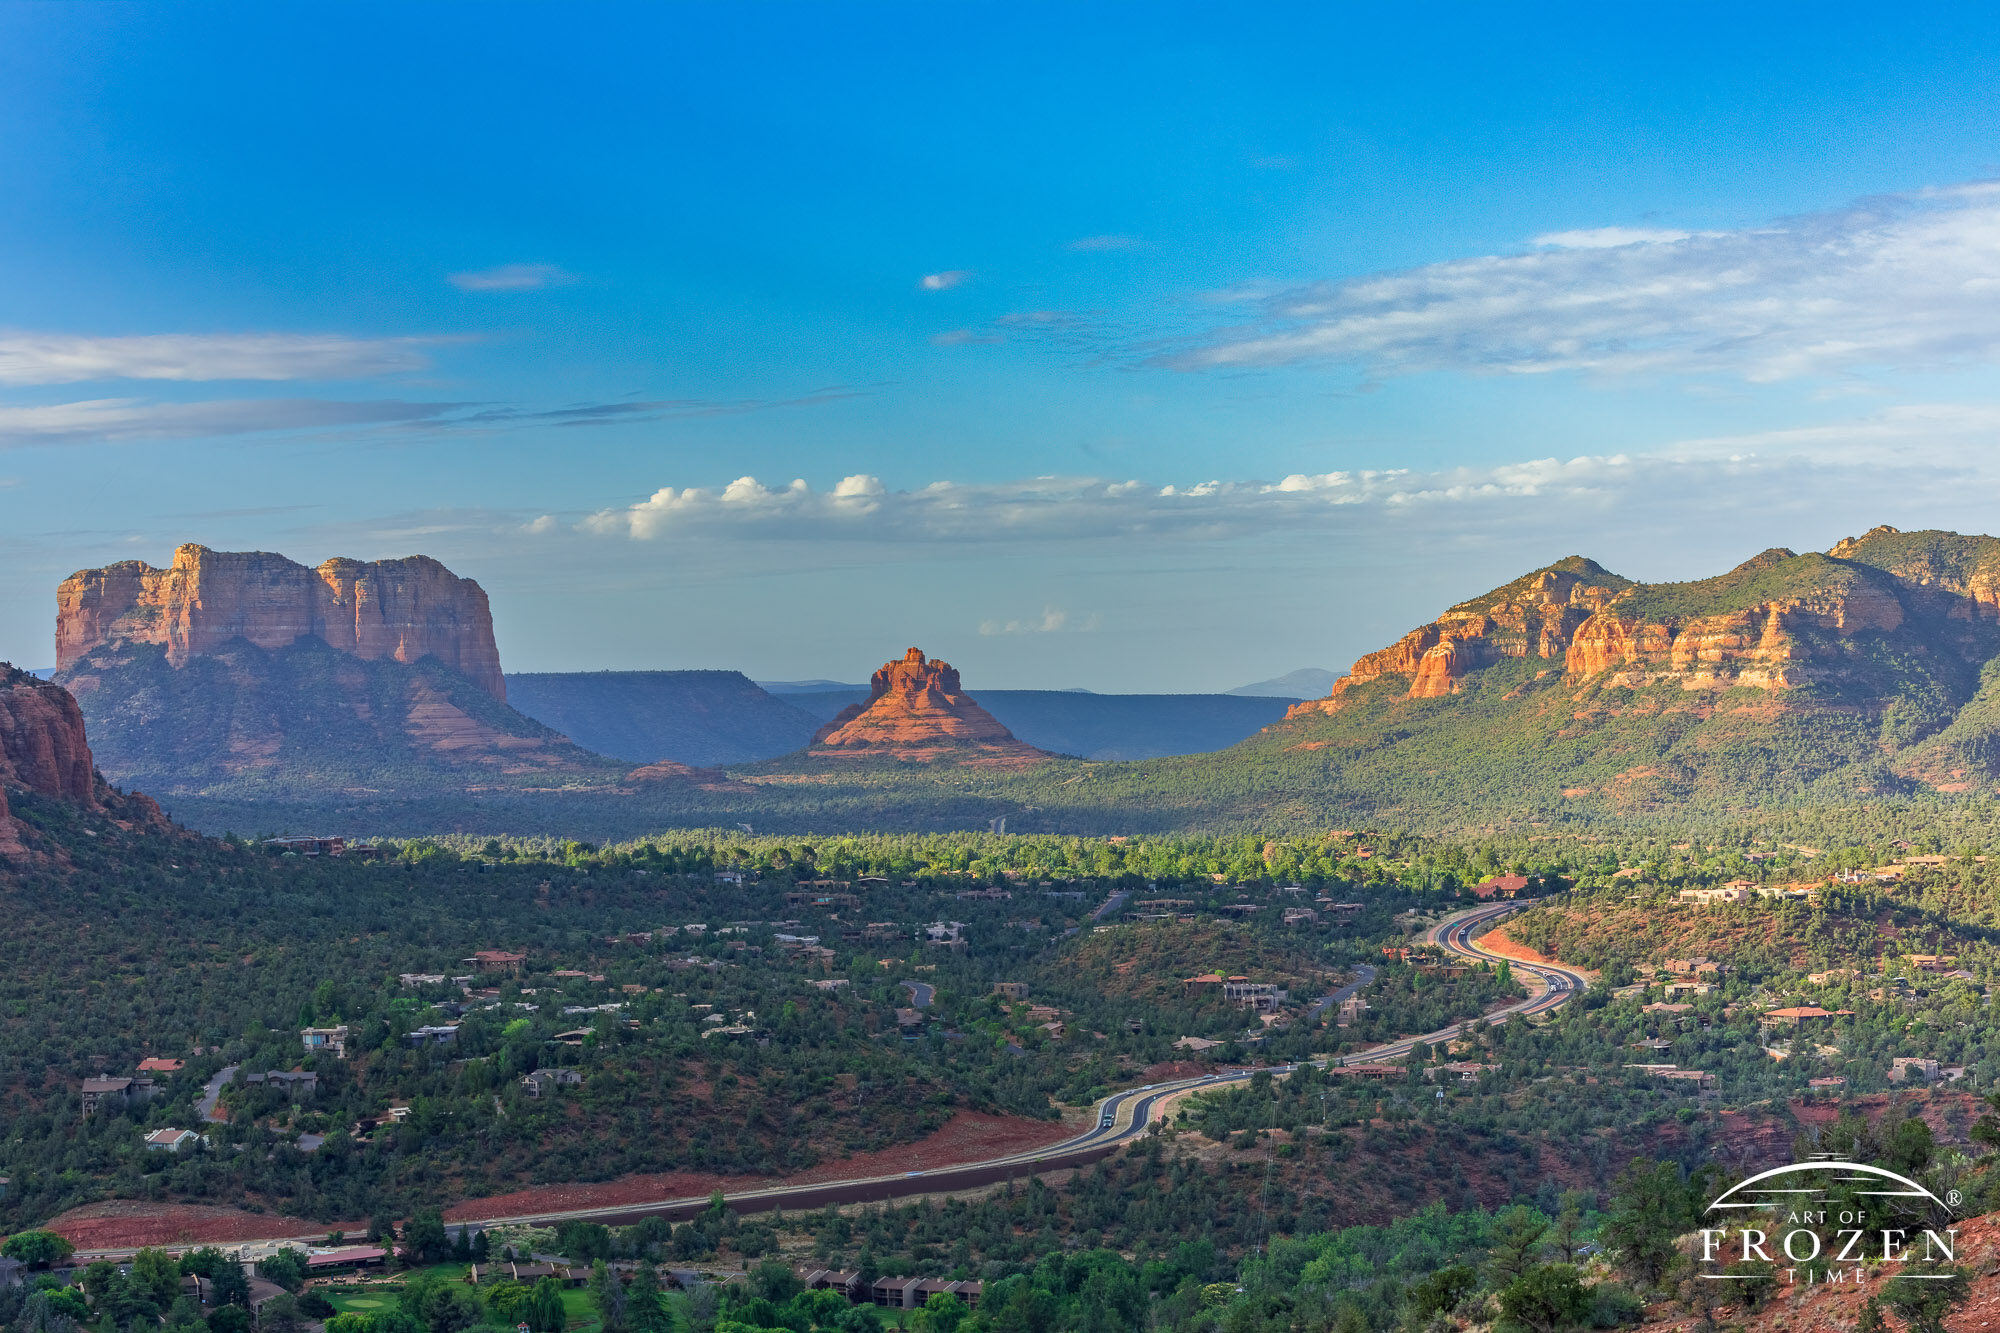 A morning view of Arizona State Route 179 leading the eye towards Sedona’s Bell Rock formation where golden light washes over the red rocks of the Schnebly Hill Formation